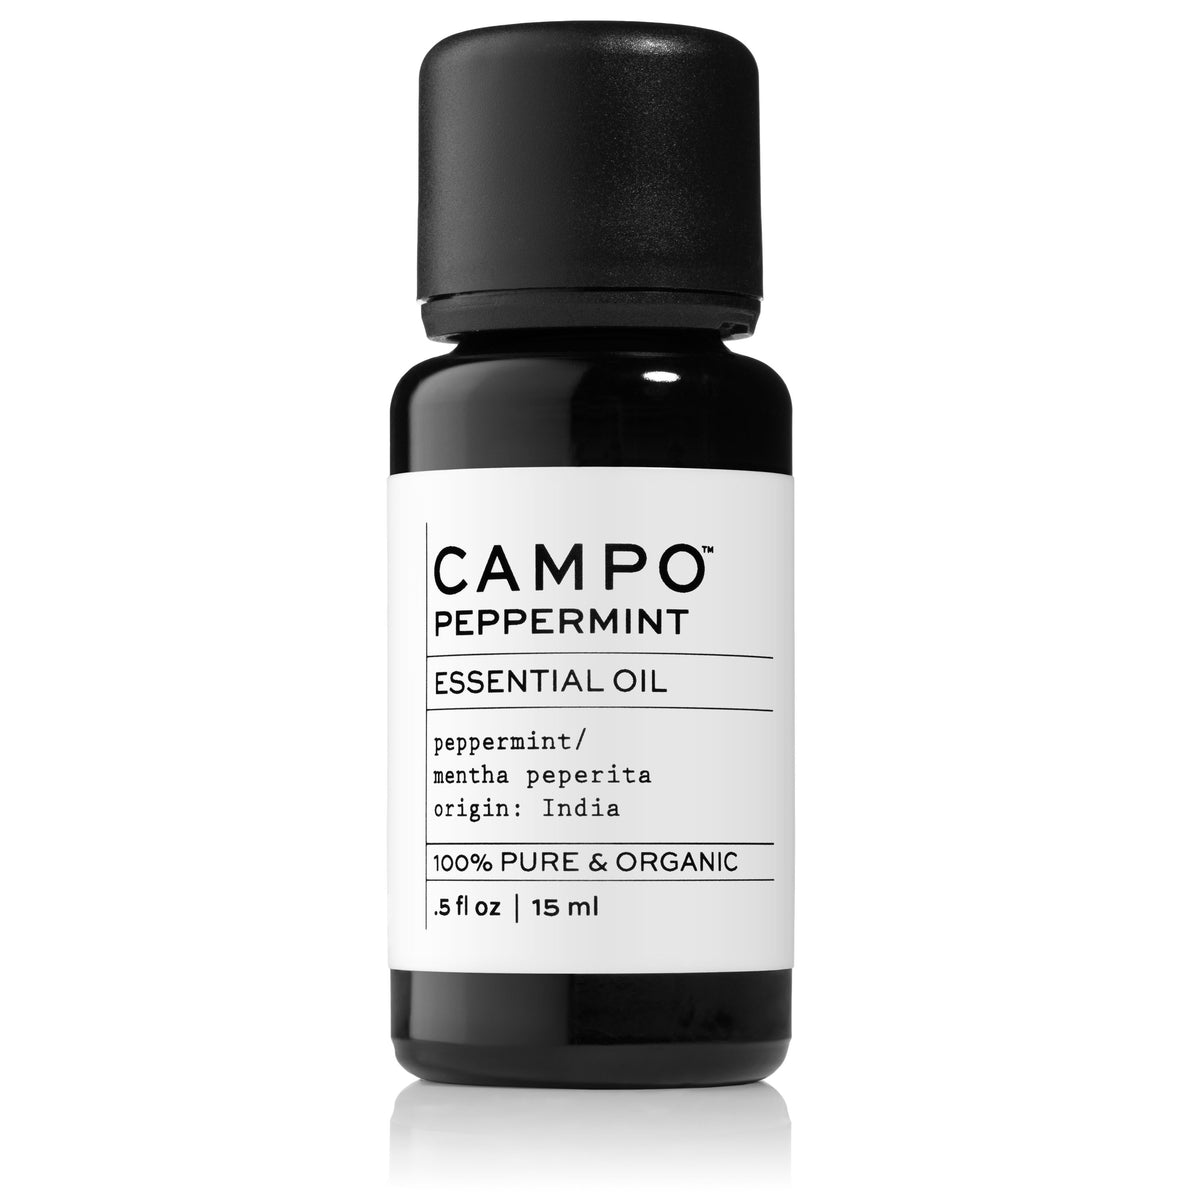 Campo Beauty PEPPERMINT Blend 15 ml Essential Oil with Peppermint/Mentha Piperita